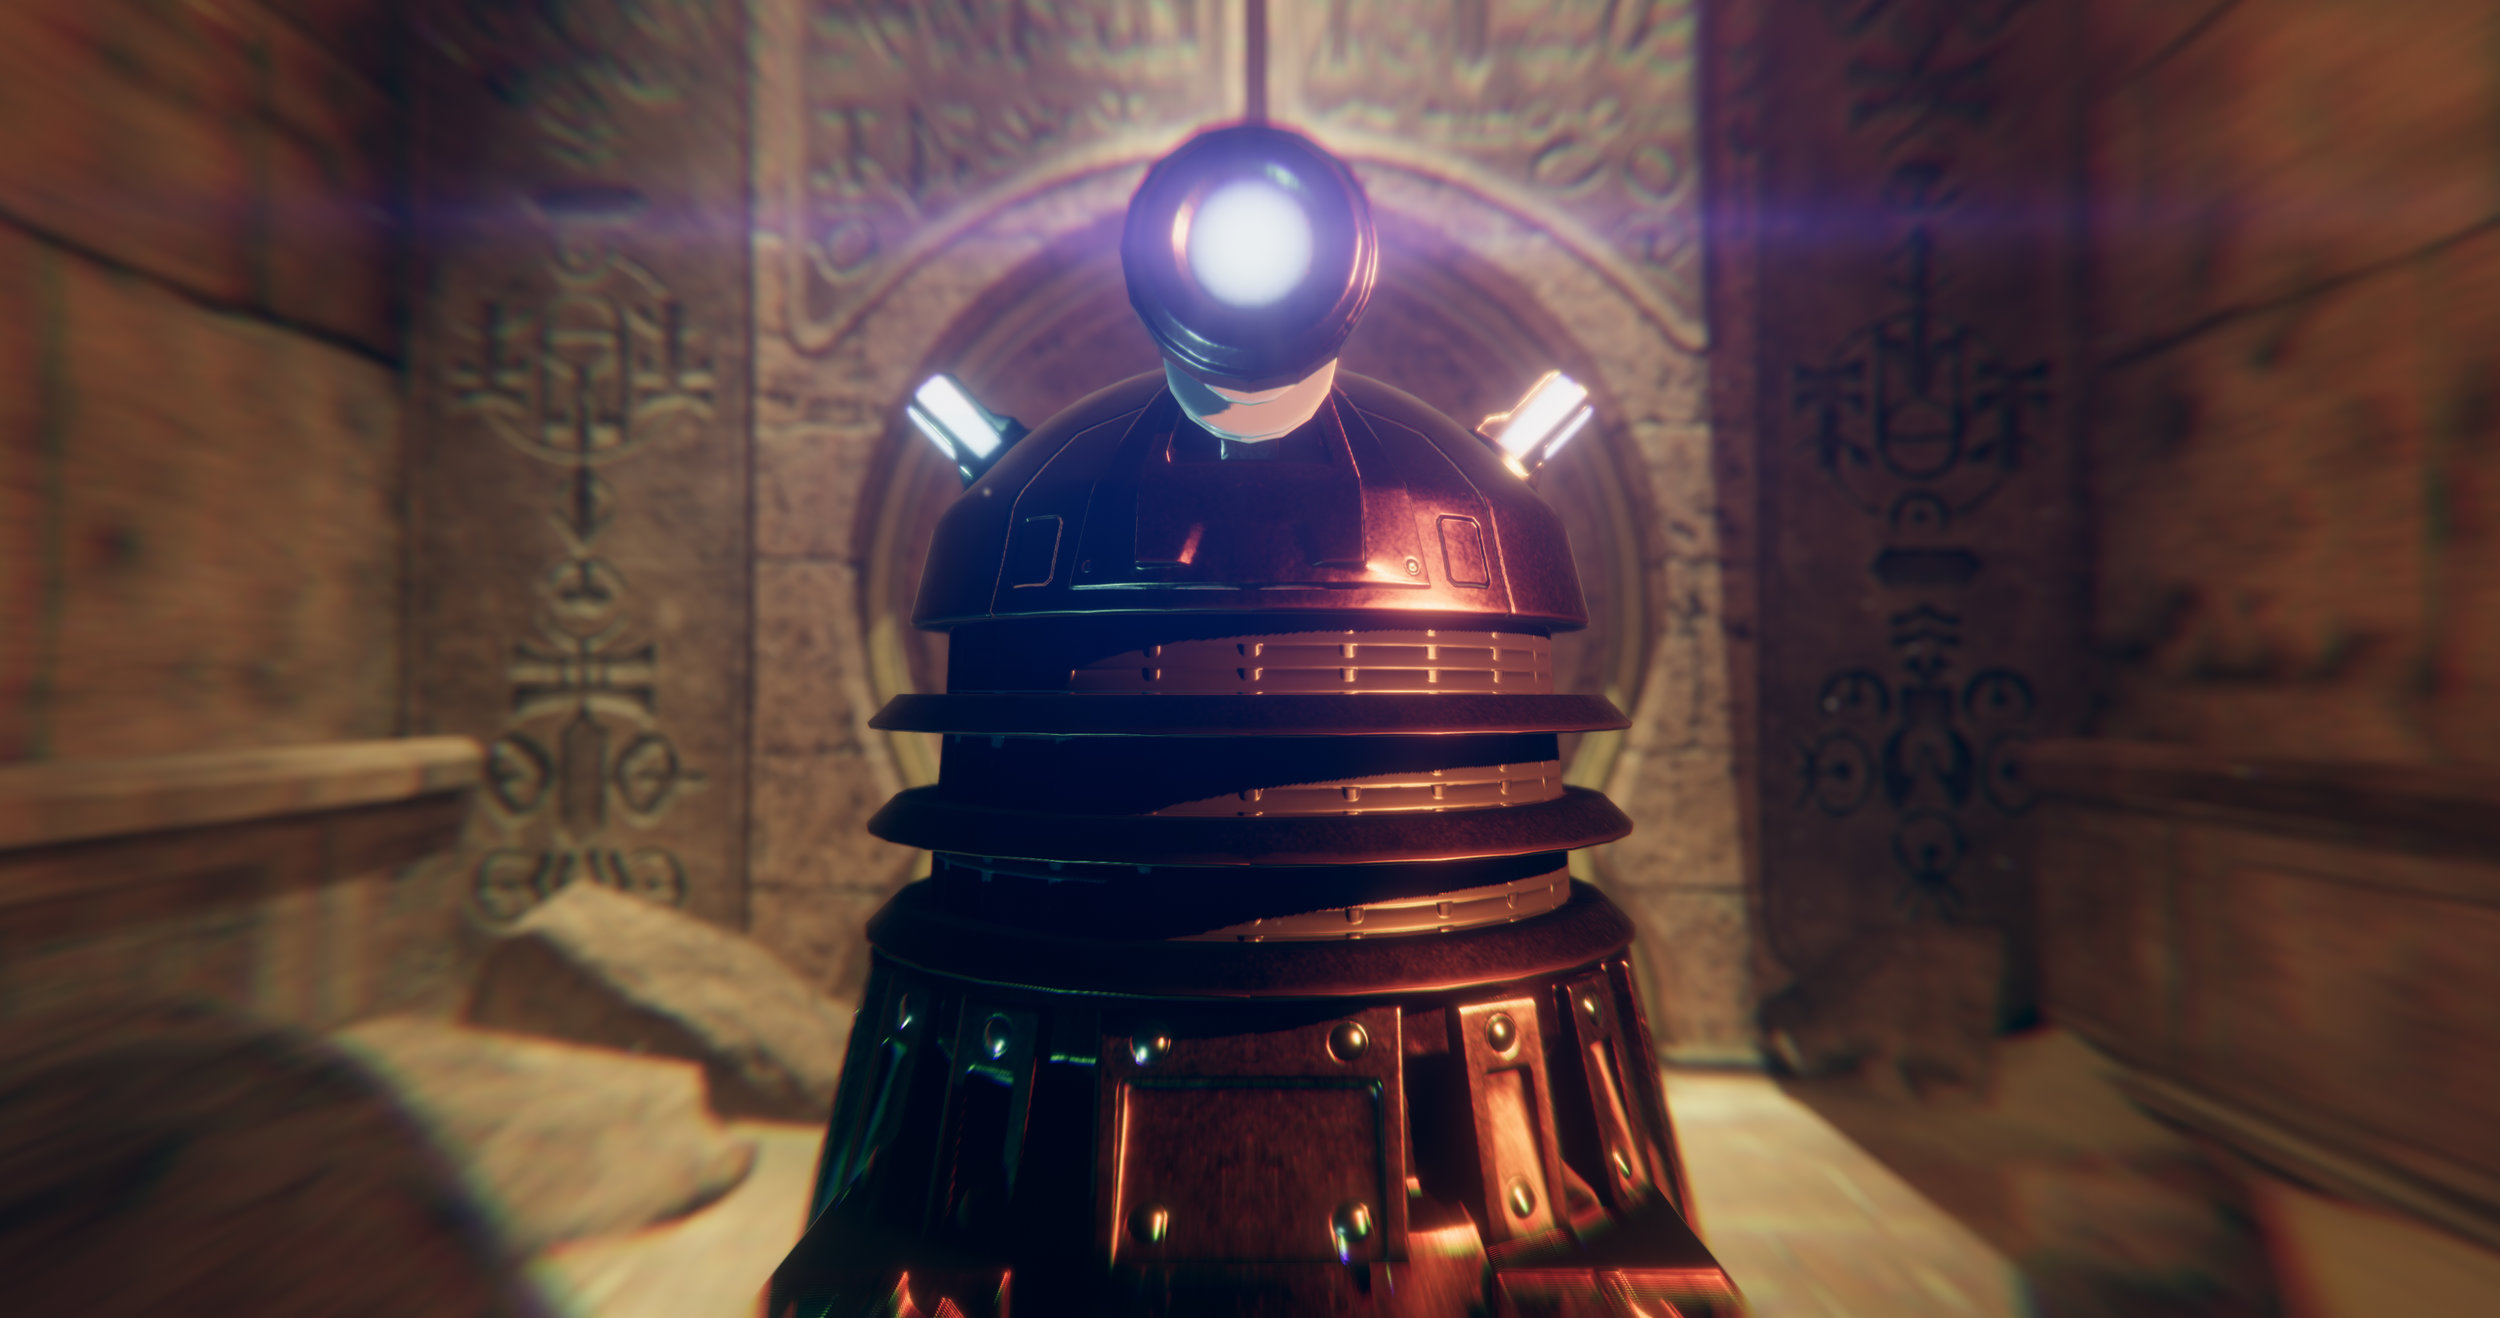 Doctor Who: The Edge of Time - Dalek